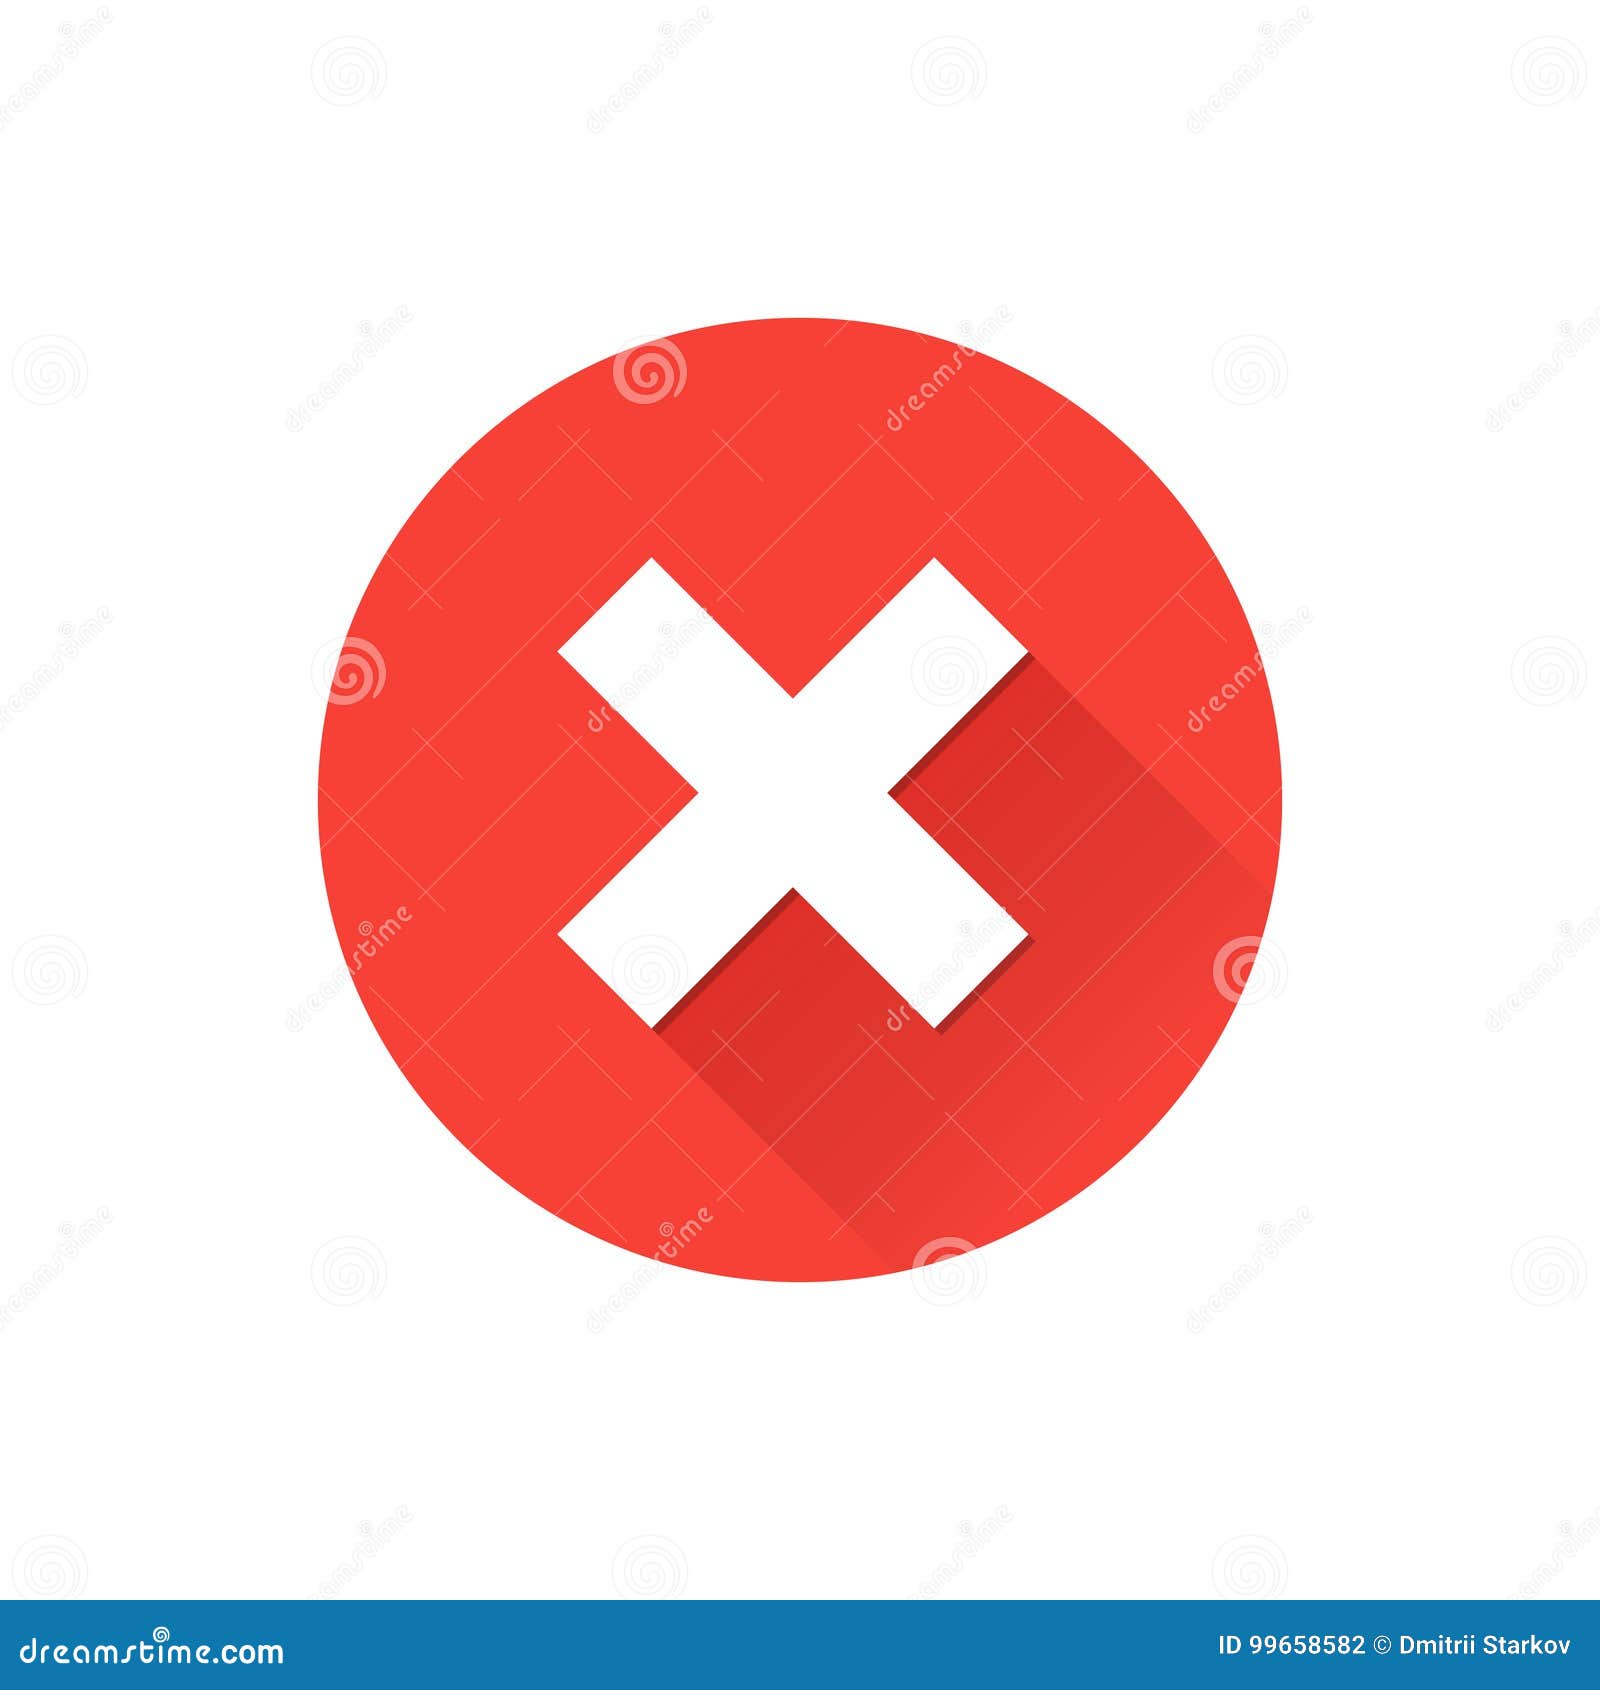 Red Cross Flat Icon in Circle. Stock Vector - Illustration of line,  isolated: 99658582